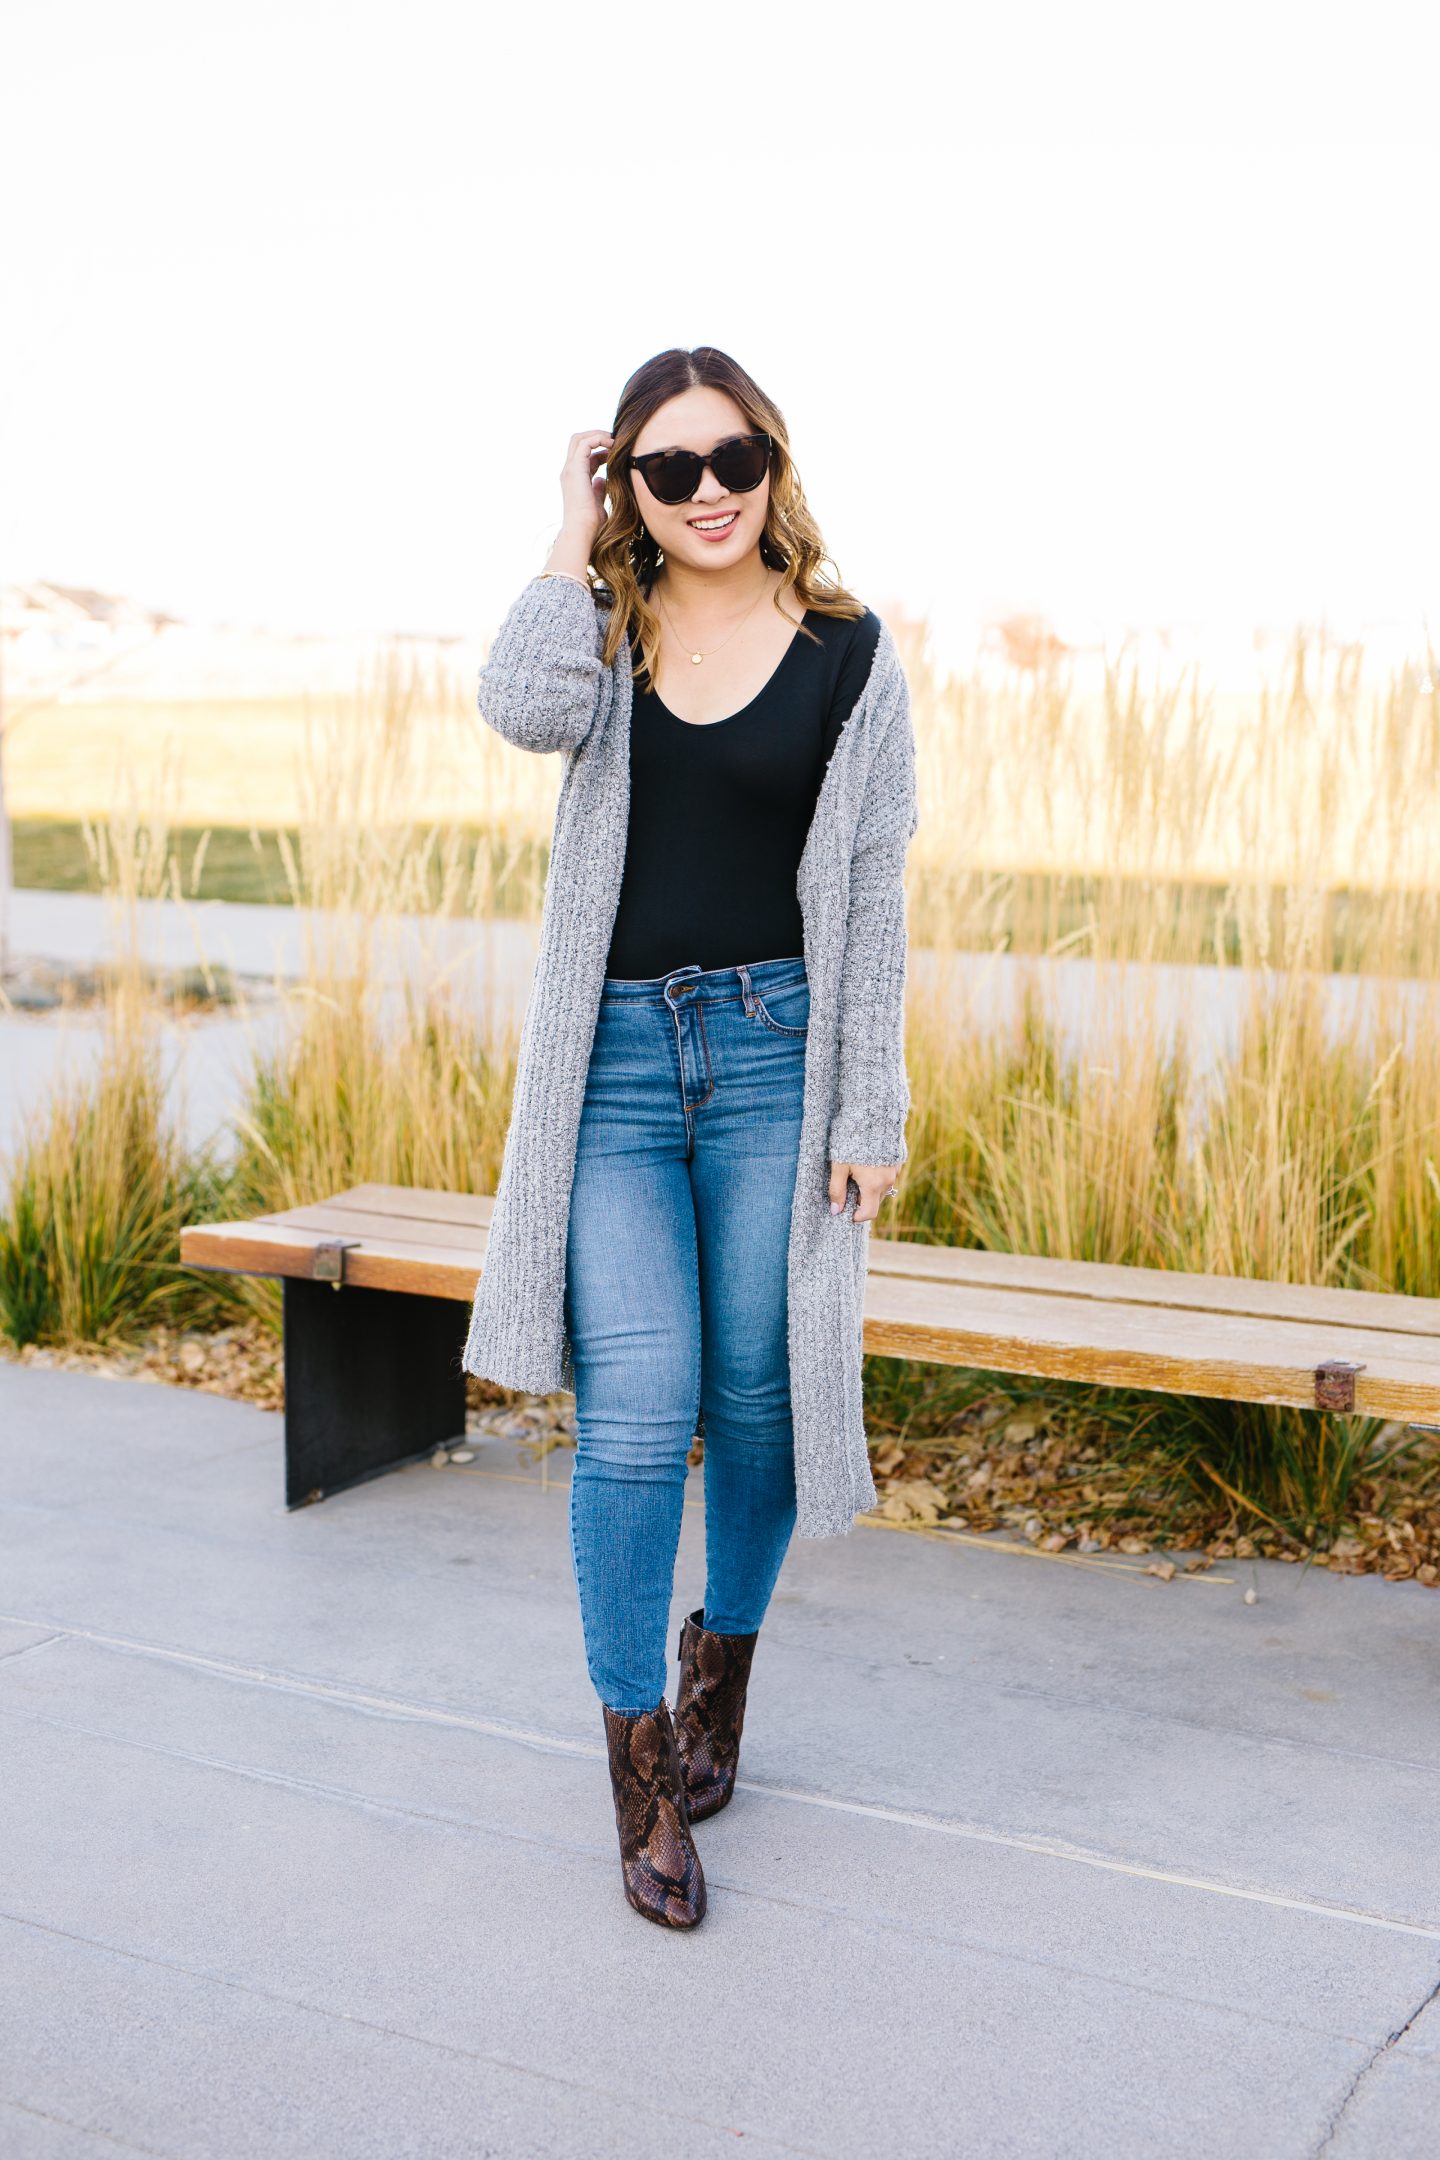 How To Style A Bodysuit For Fall